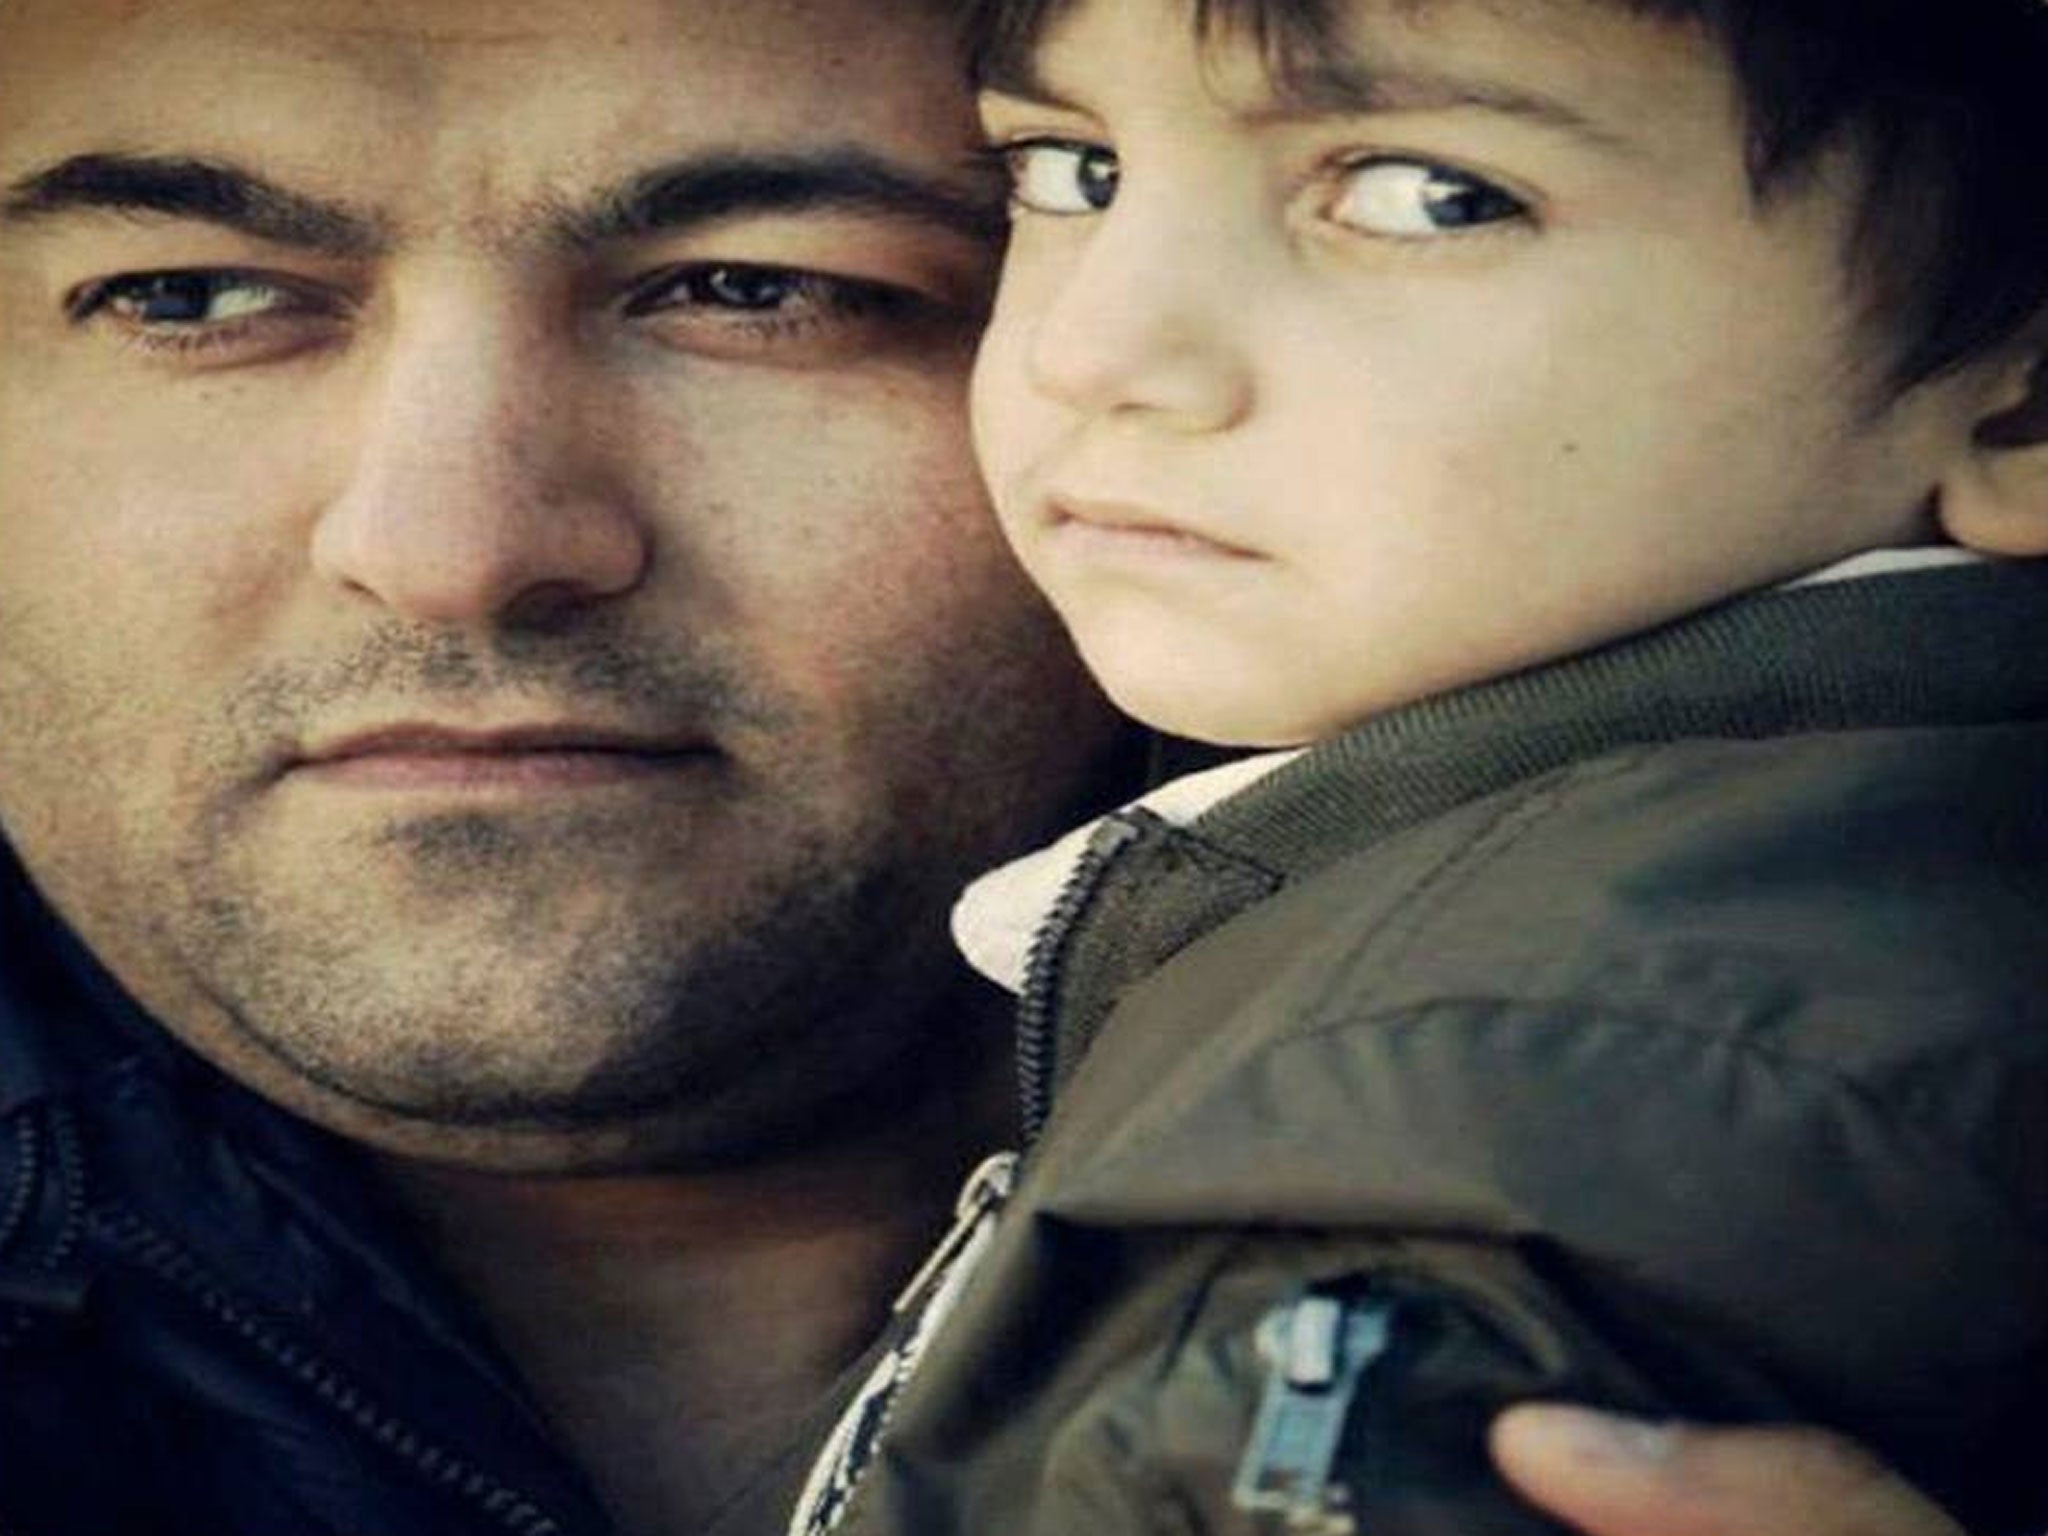 Father-of-two Ghader Ghalamere has been the subject of a major campaign in Sweden to prevent his deportation